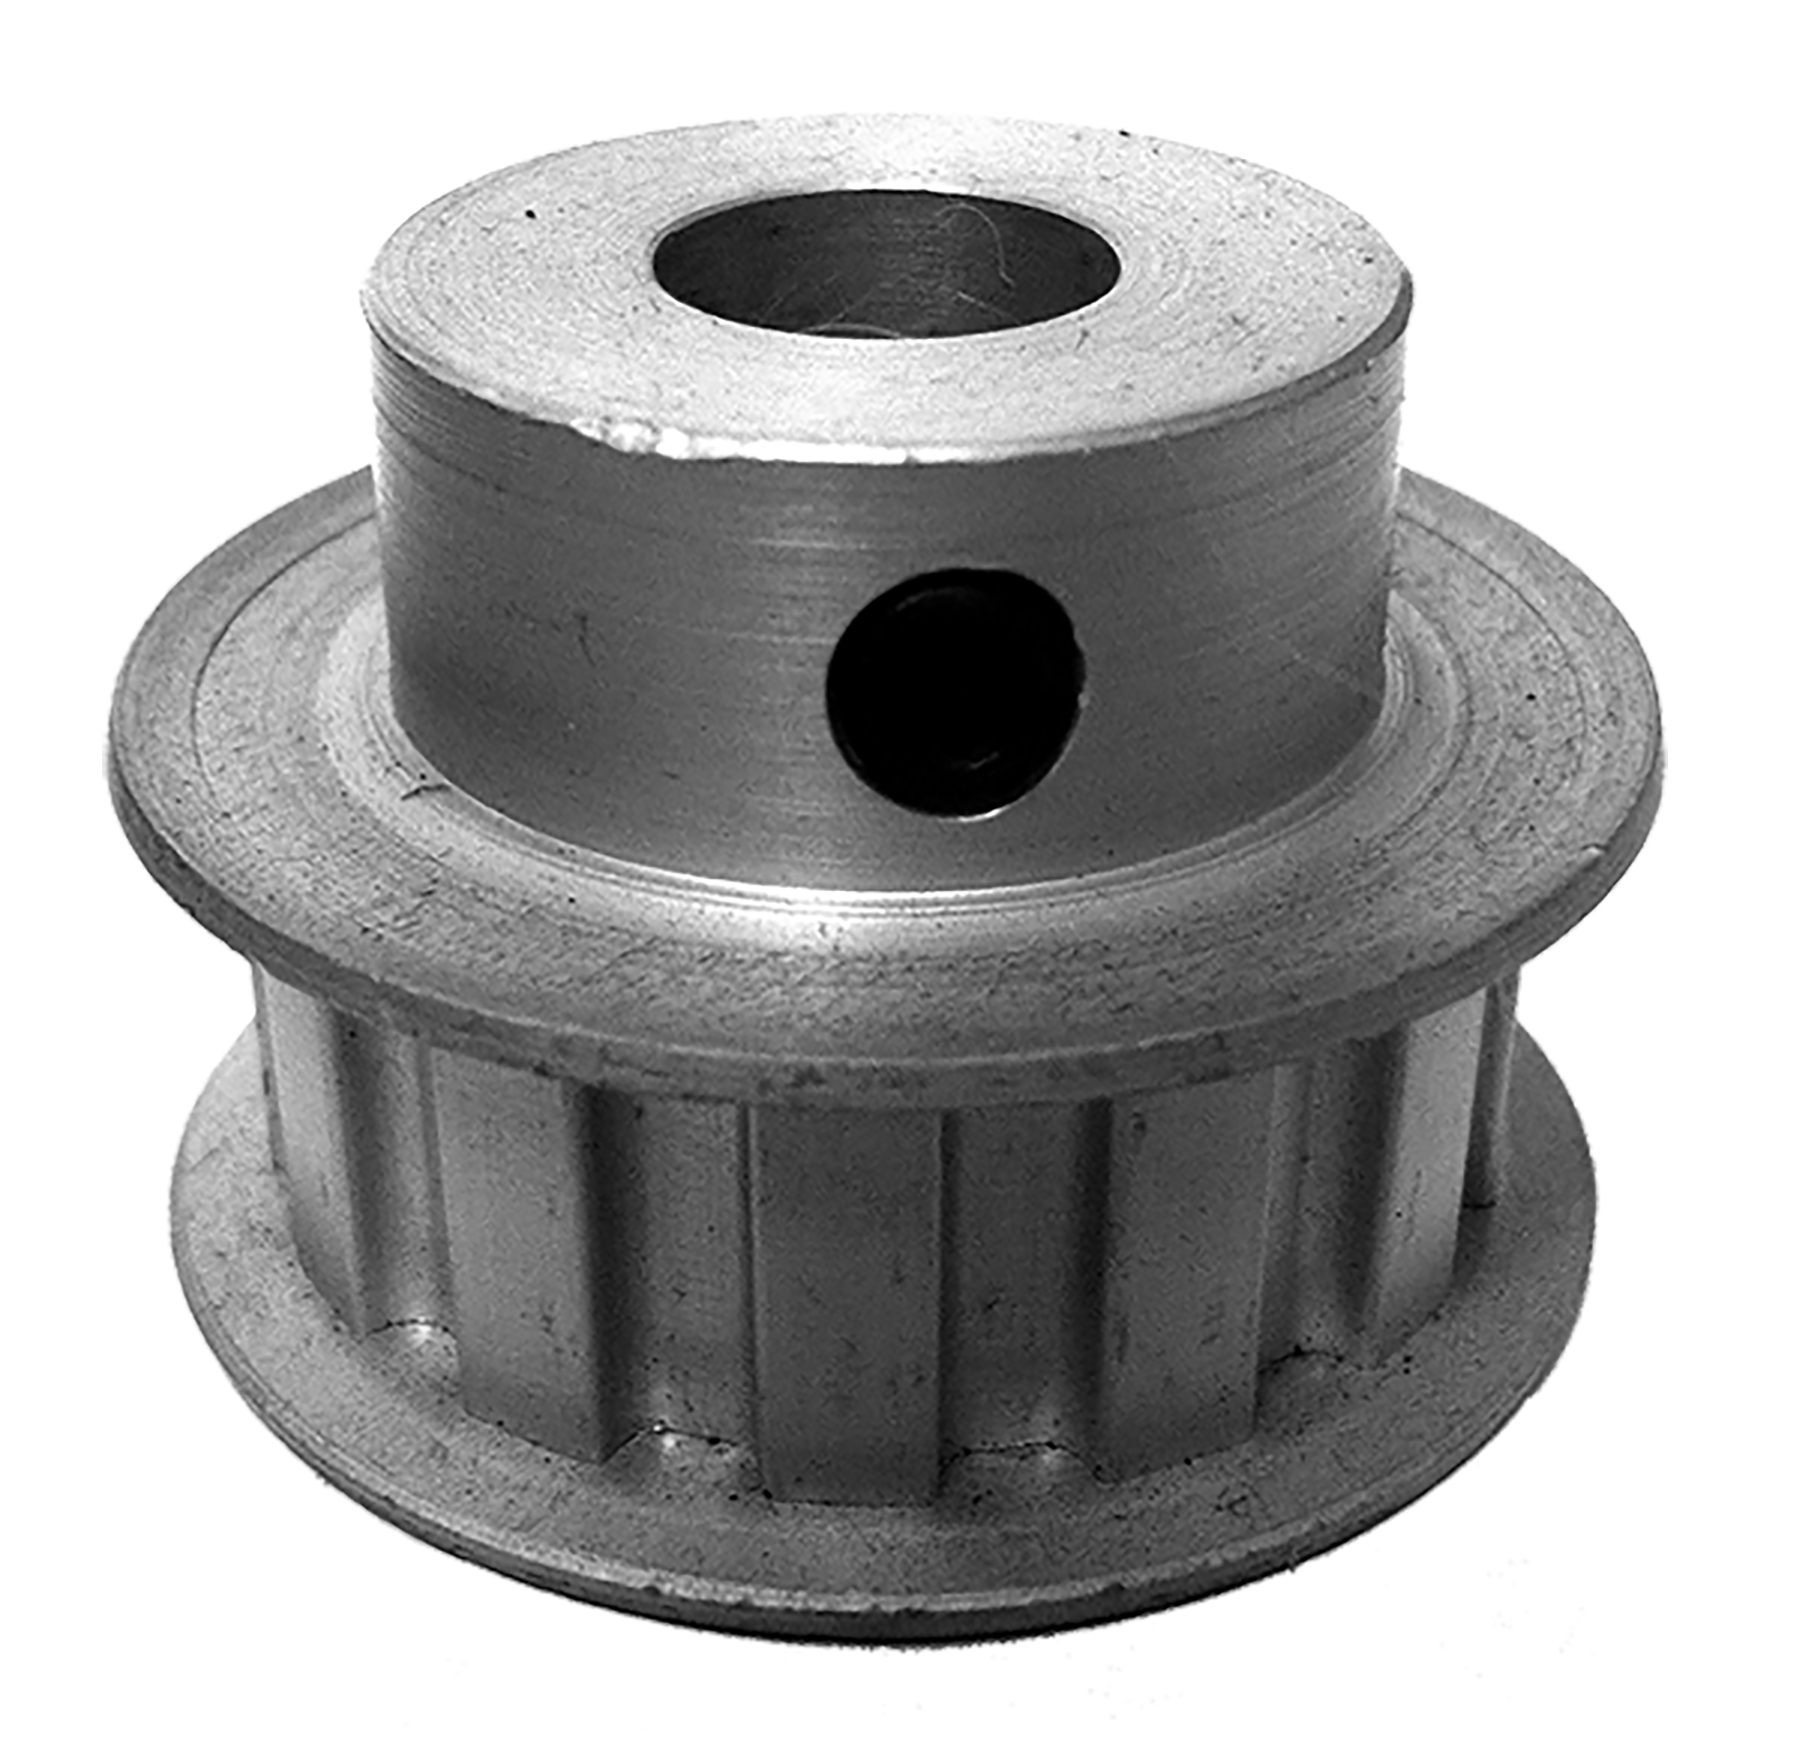 21L100-6FA6 - Aluminum Imperial Pitch Pulleys